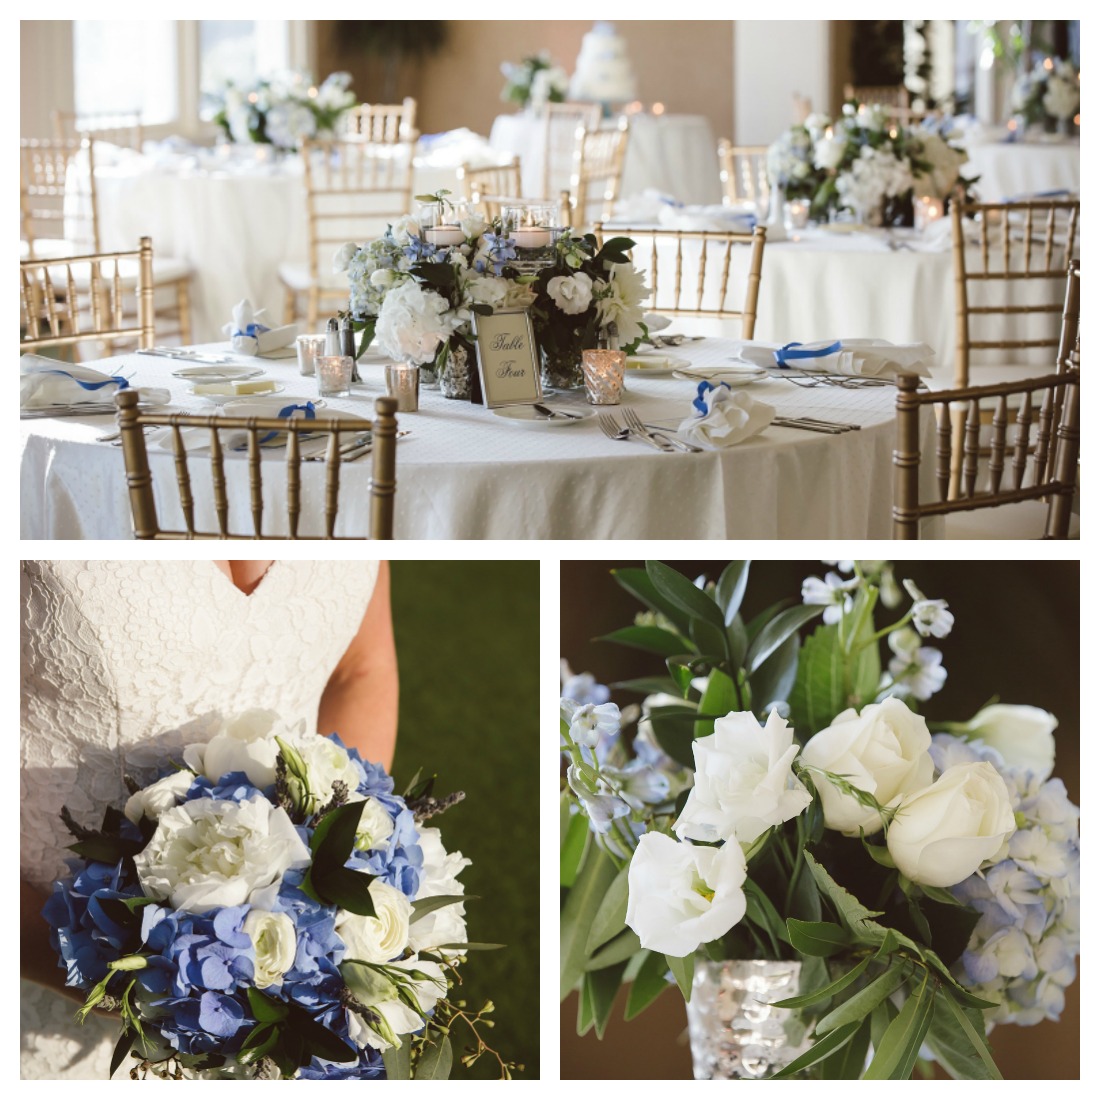 Blue and white wedding centerpieces